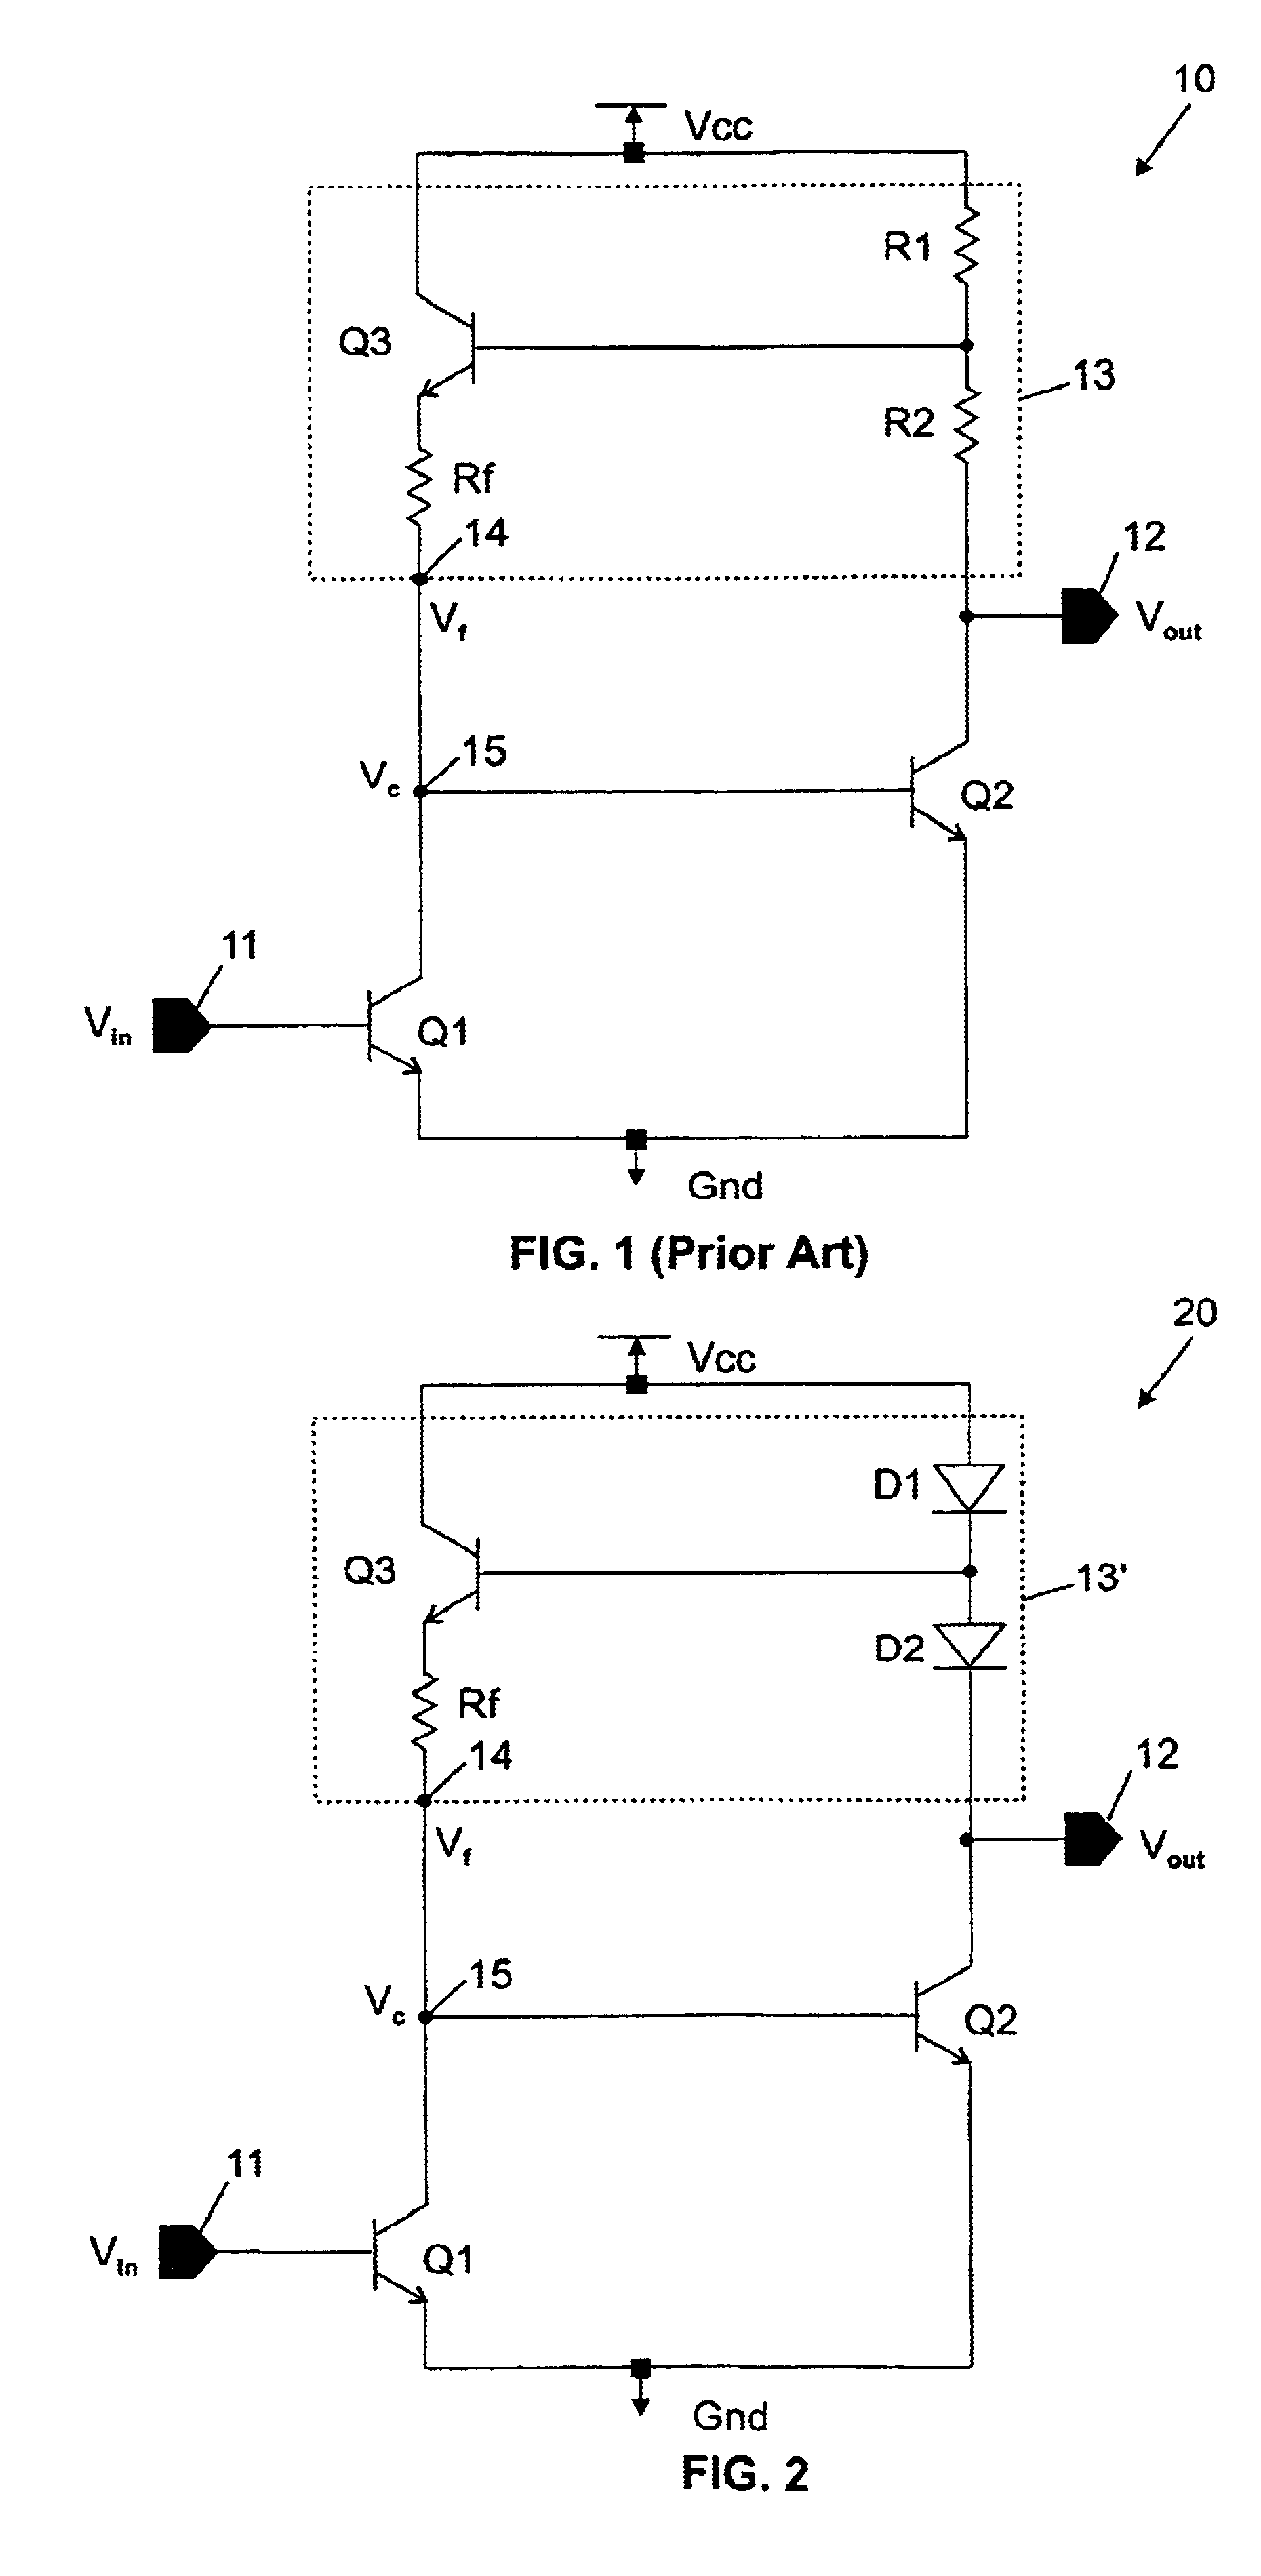 2-stage large bandwidth amplifier using diodes in the parallel feedback structure